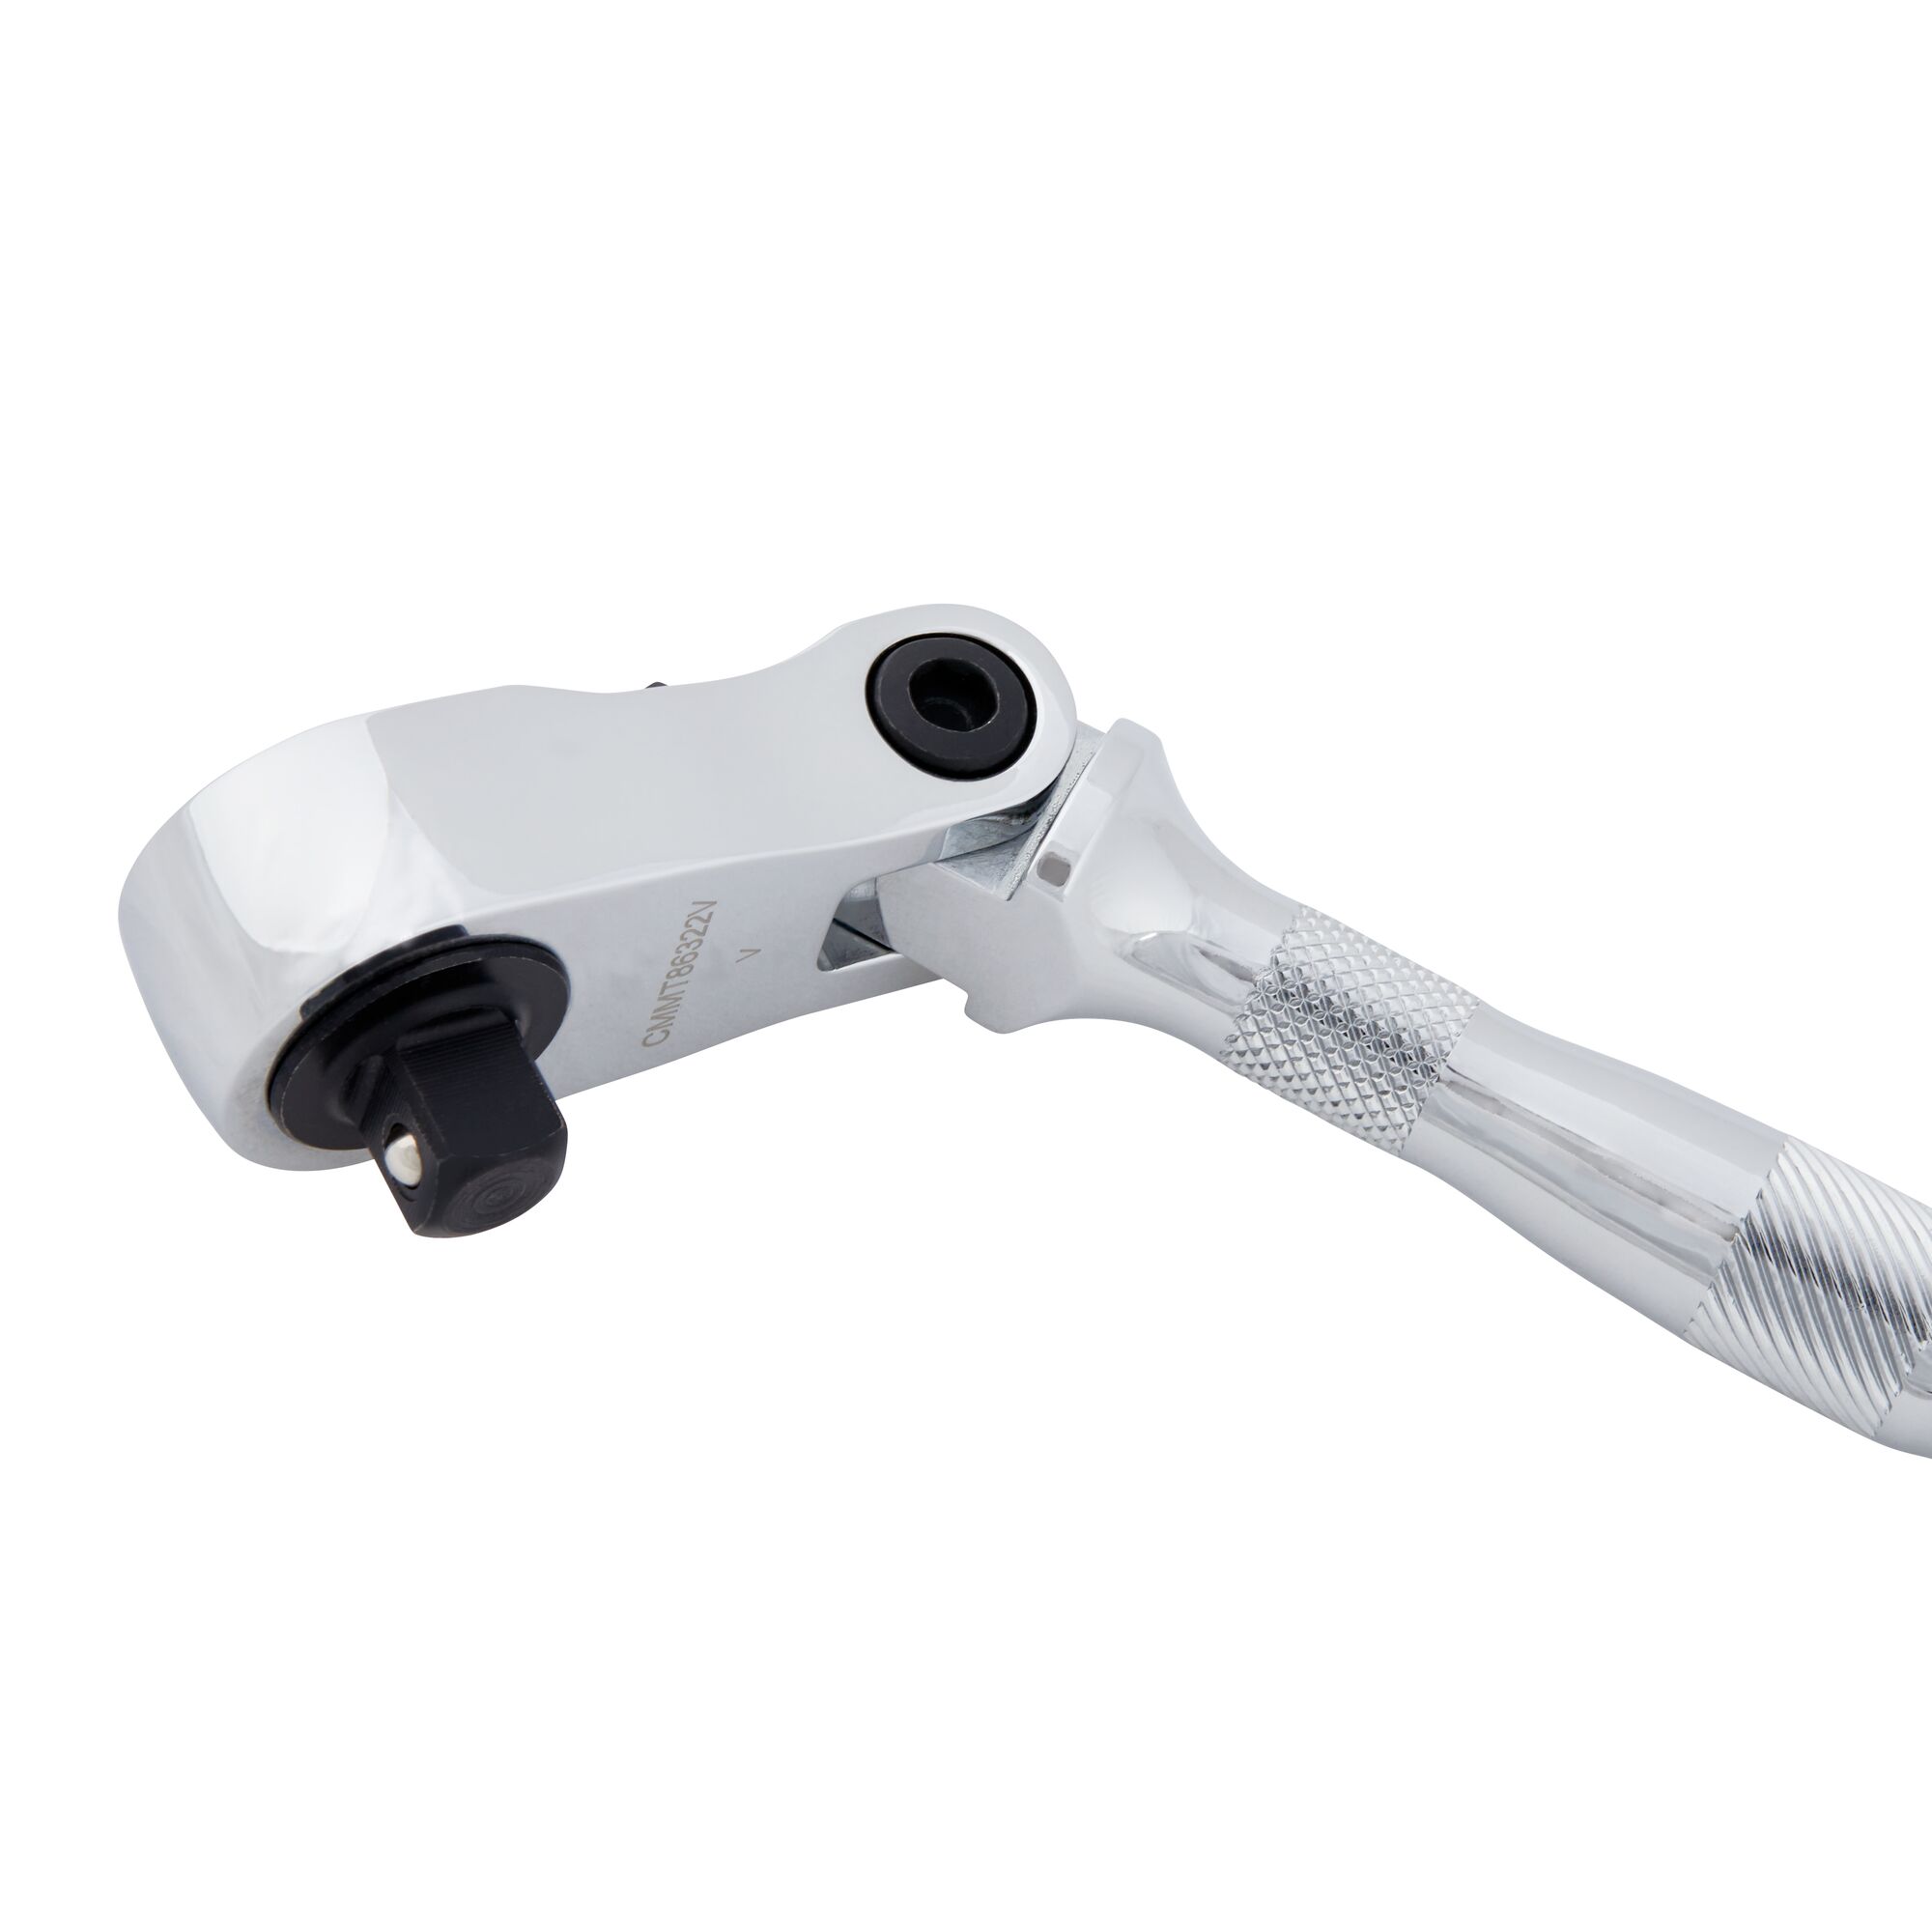 180 degrees articulating head feature in V series three eighth inch drive flex head ratchet.